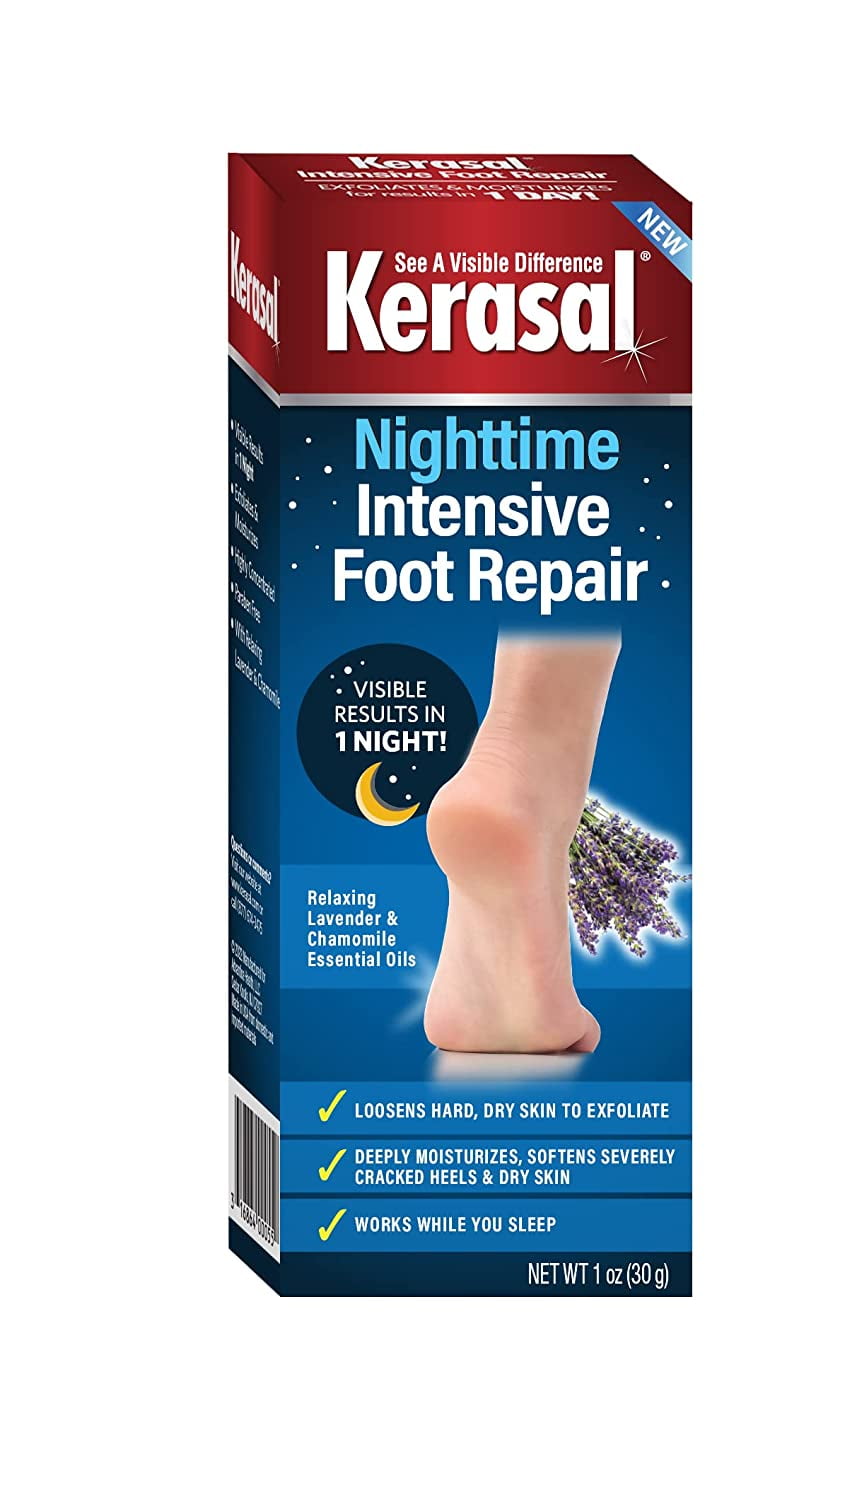 Amazon.com: Dr Scholl's Dry, Cracked Foot Repair Ultra-Hydrating Foot Cream  3.5 oz, Lotion with 25% Urea for Dry Cracked Feet, Heals and Moisturizes  for Healthy Feet : Beauty & Personal Care